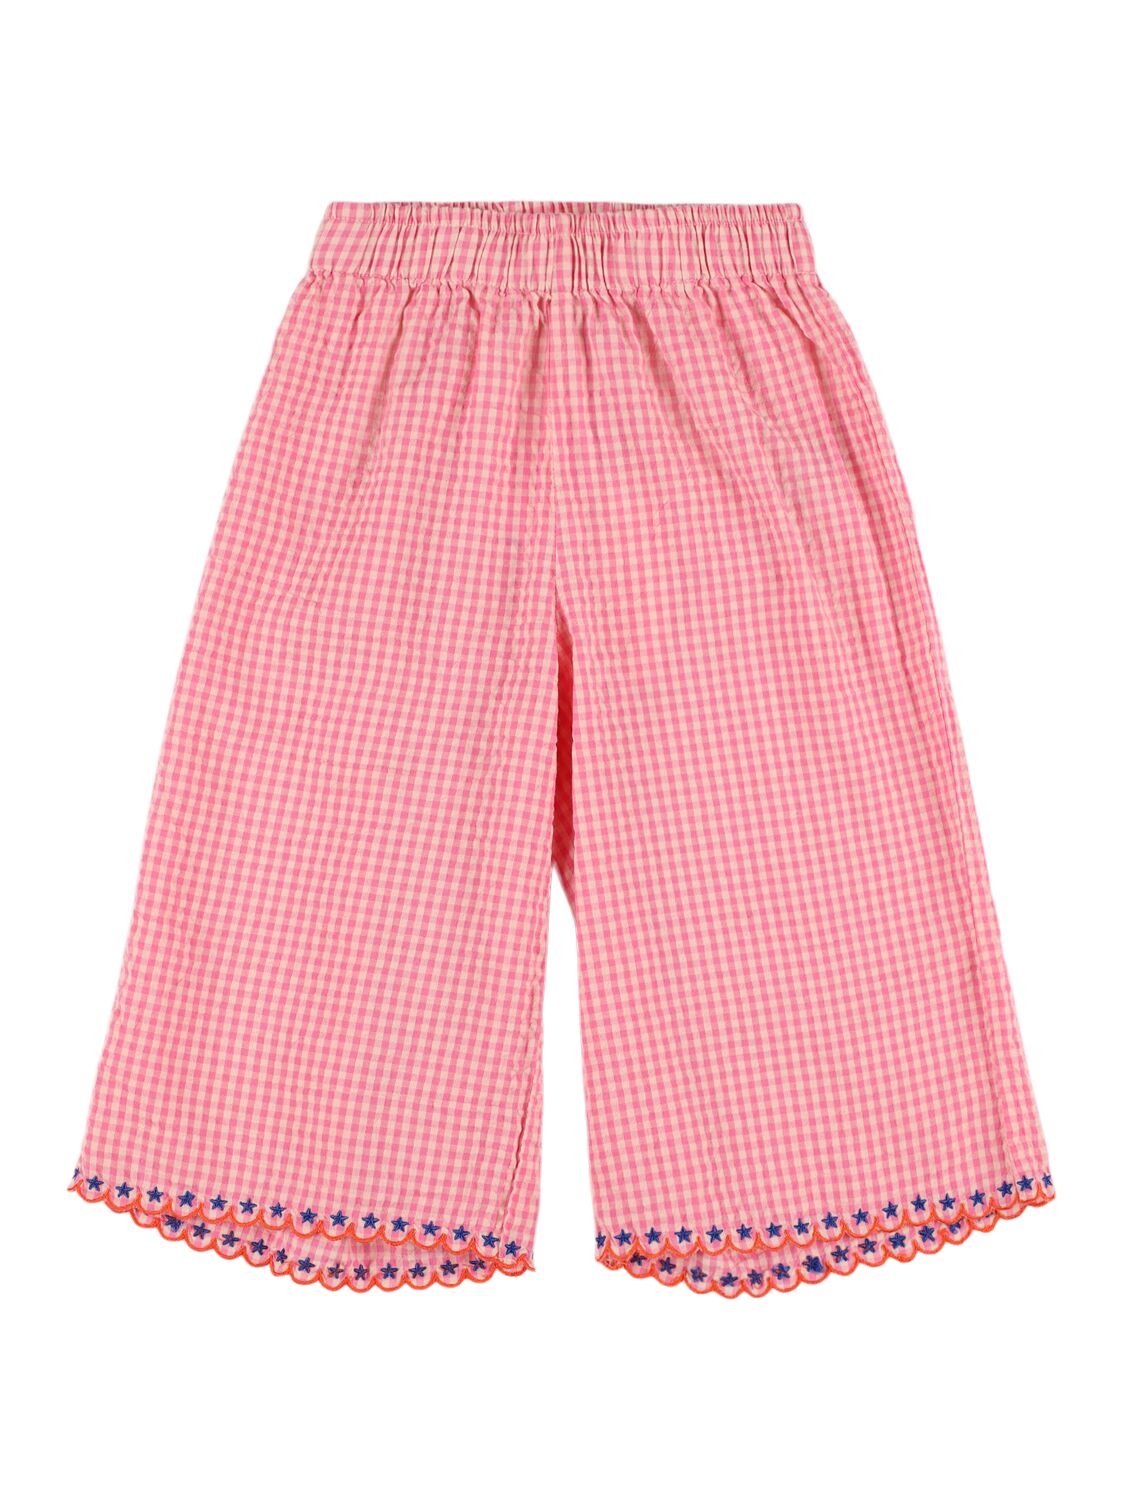 Tiny Cottons Kids' Cotton Gingham Trousers In Pink